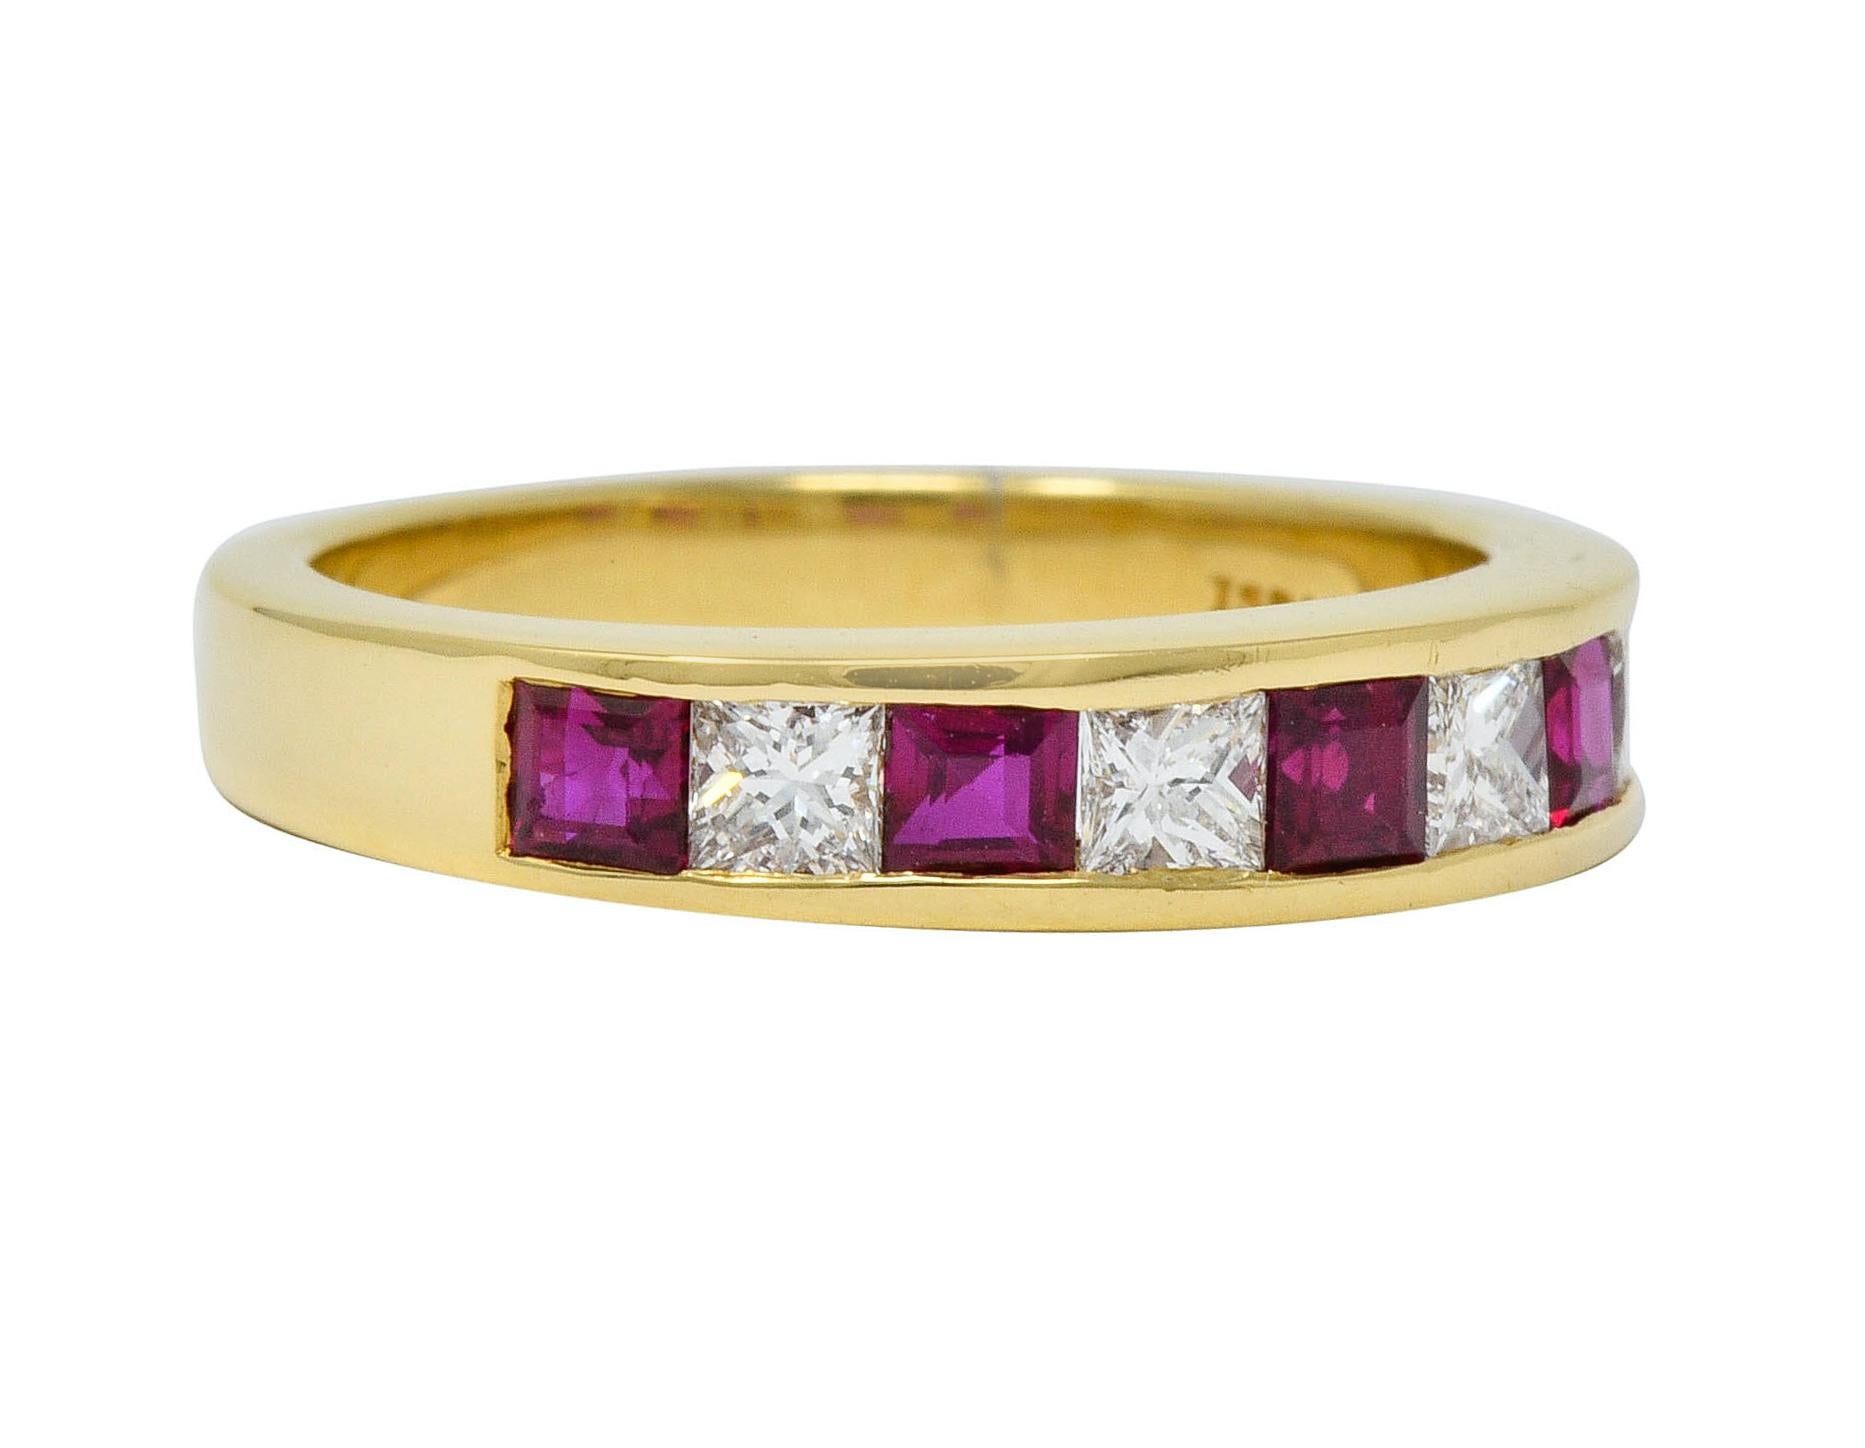 Band ring channel set to front with alternating square cut ruby and princess cut diamonds

Diamonds weigh approximately 0.50 carat total with F/G color and VS clarity

Rubies are a very well-matched bright red color and weigh approximately 0.80